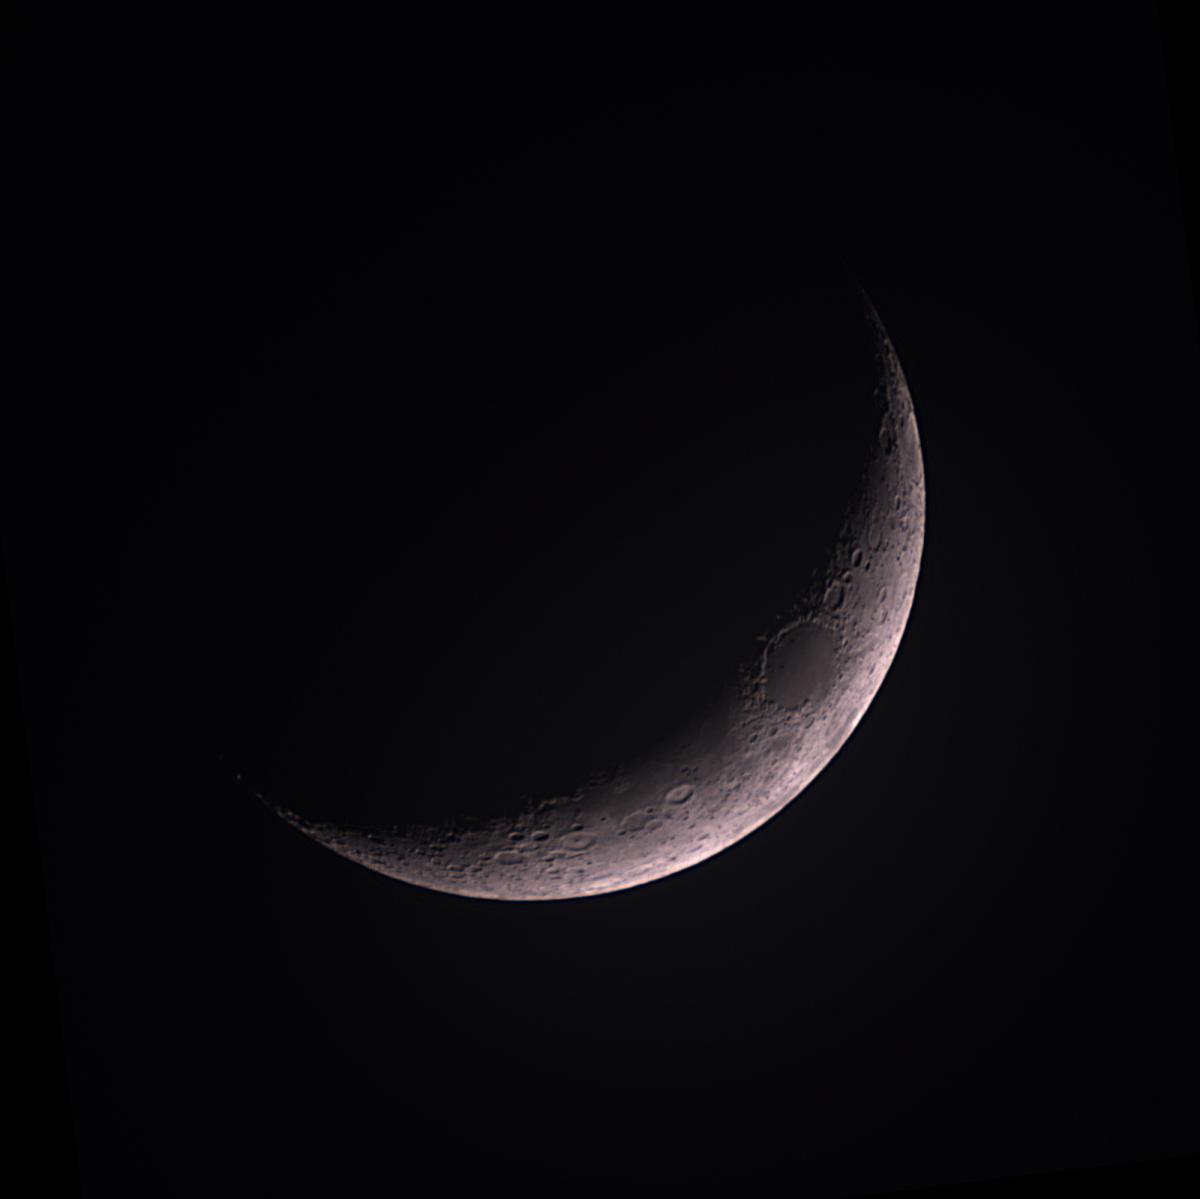 Photograph of the waxing crescent Moon